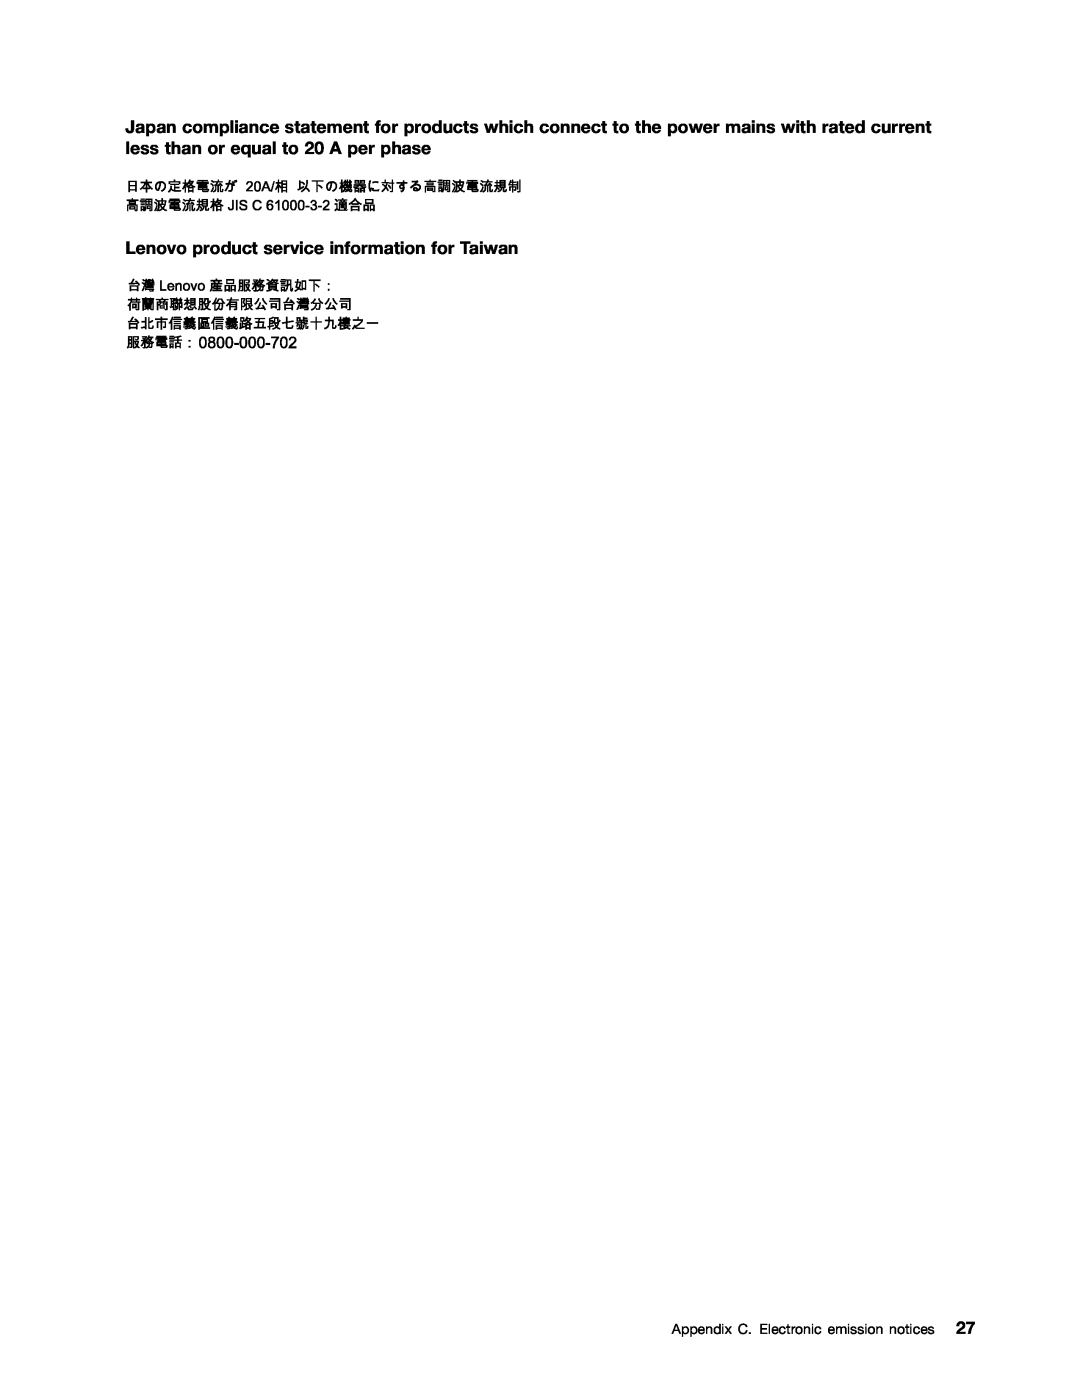 Lenovo 0A33942 manual Lenovo product service information for Taiwan, Appendix C. Electronic emission notices 